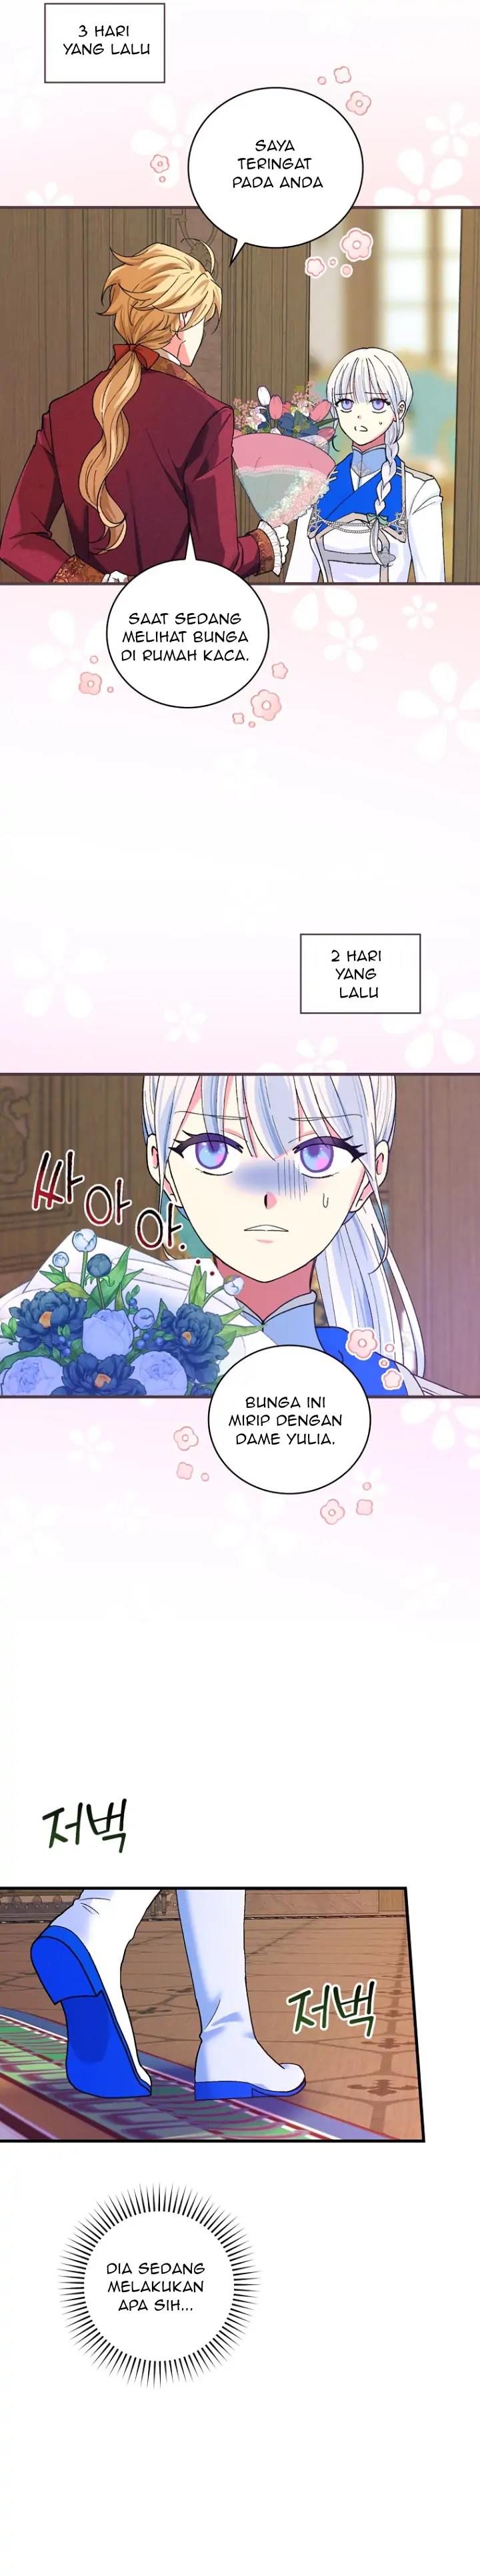 Knight of the Frozen Flower Chapter 40